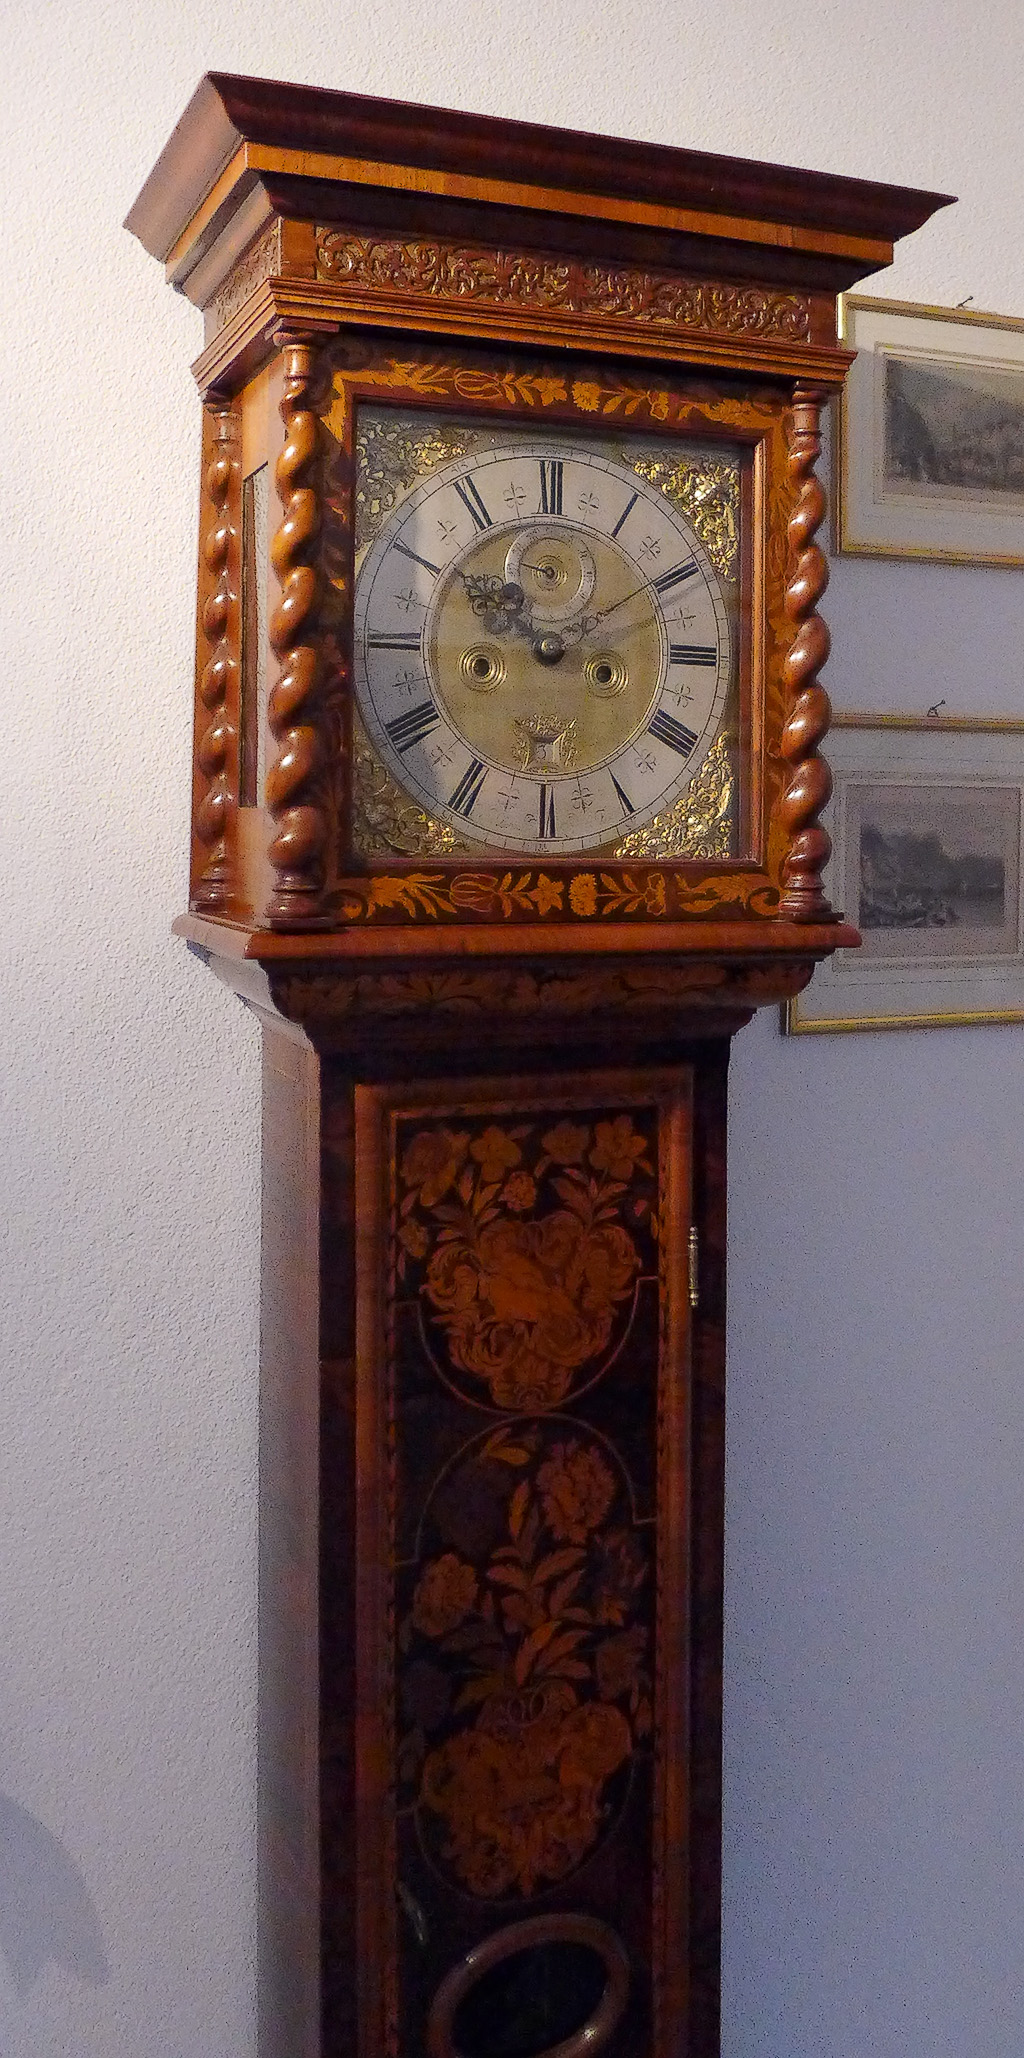 An English grandfather clock, made in the 19th century.